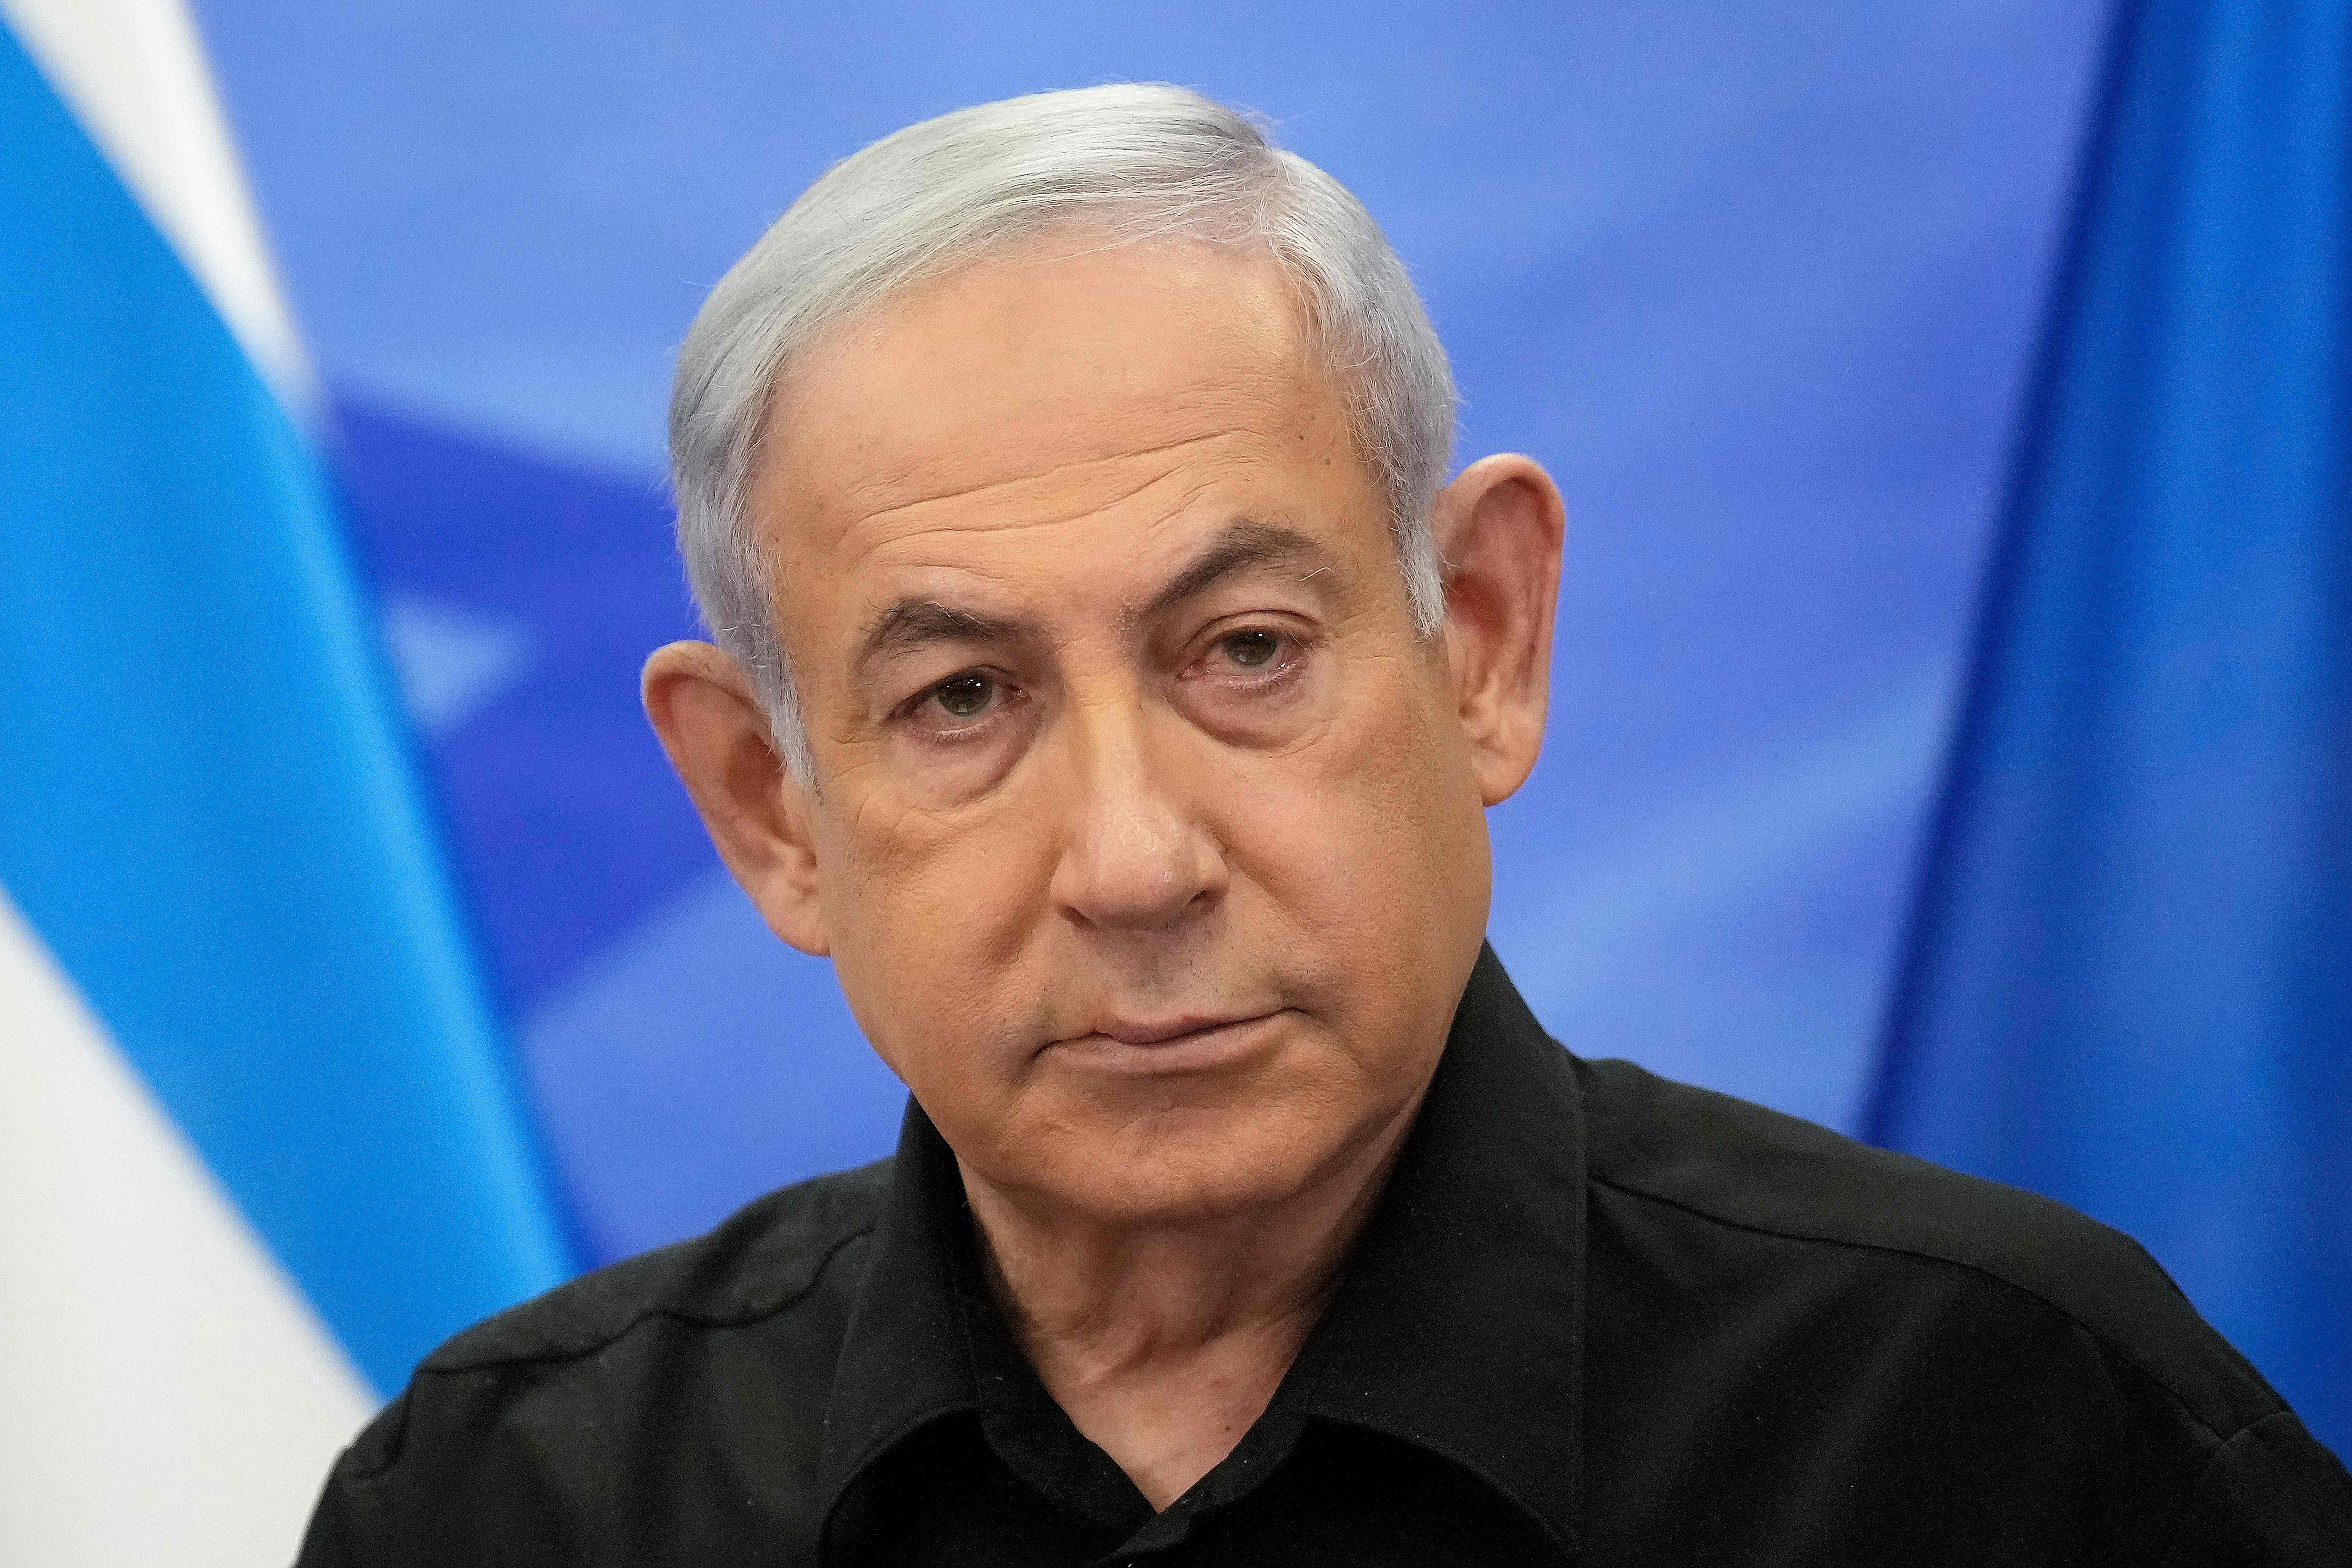 Benjamin Netanyahu apologised for blaming his intelligence chiefs. But experts say the damage is done